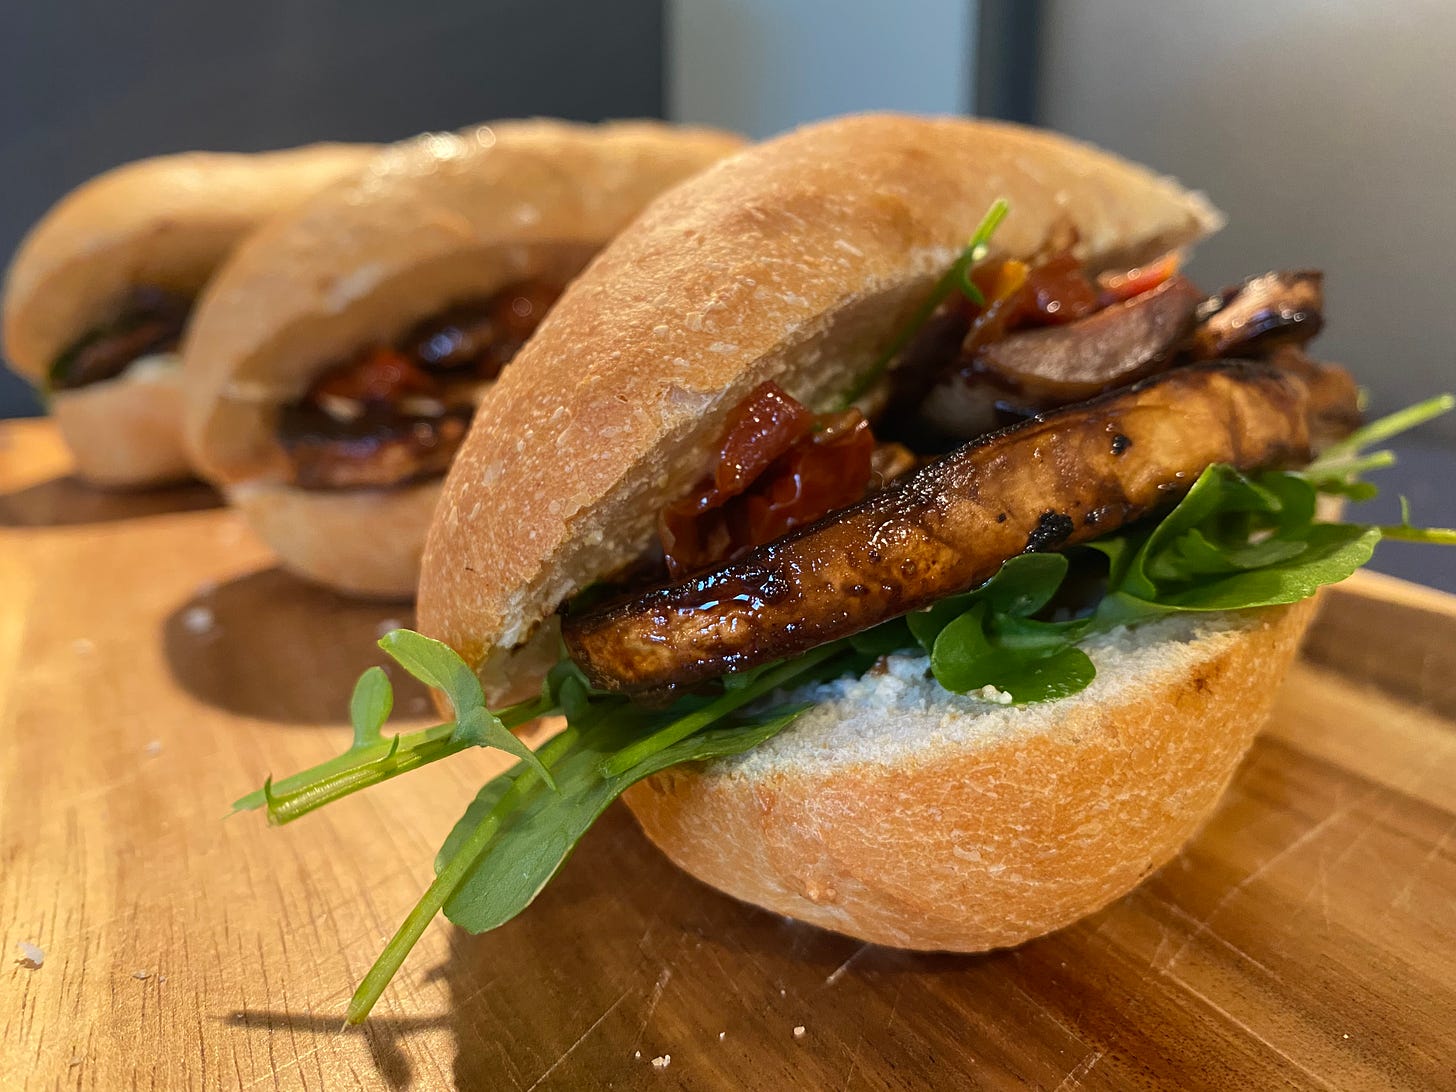 Row of three baguette sandwiches on a wooden chopping board. Each roll is filled with mushrooms, salad leaves and sun-dried tomatoes.